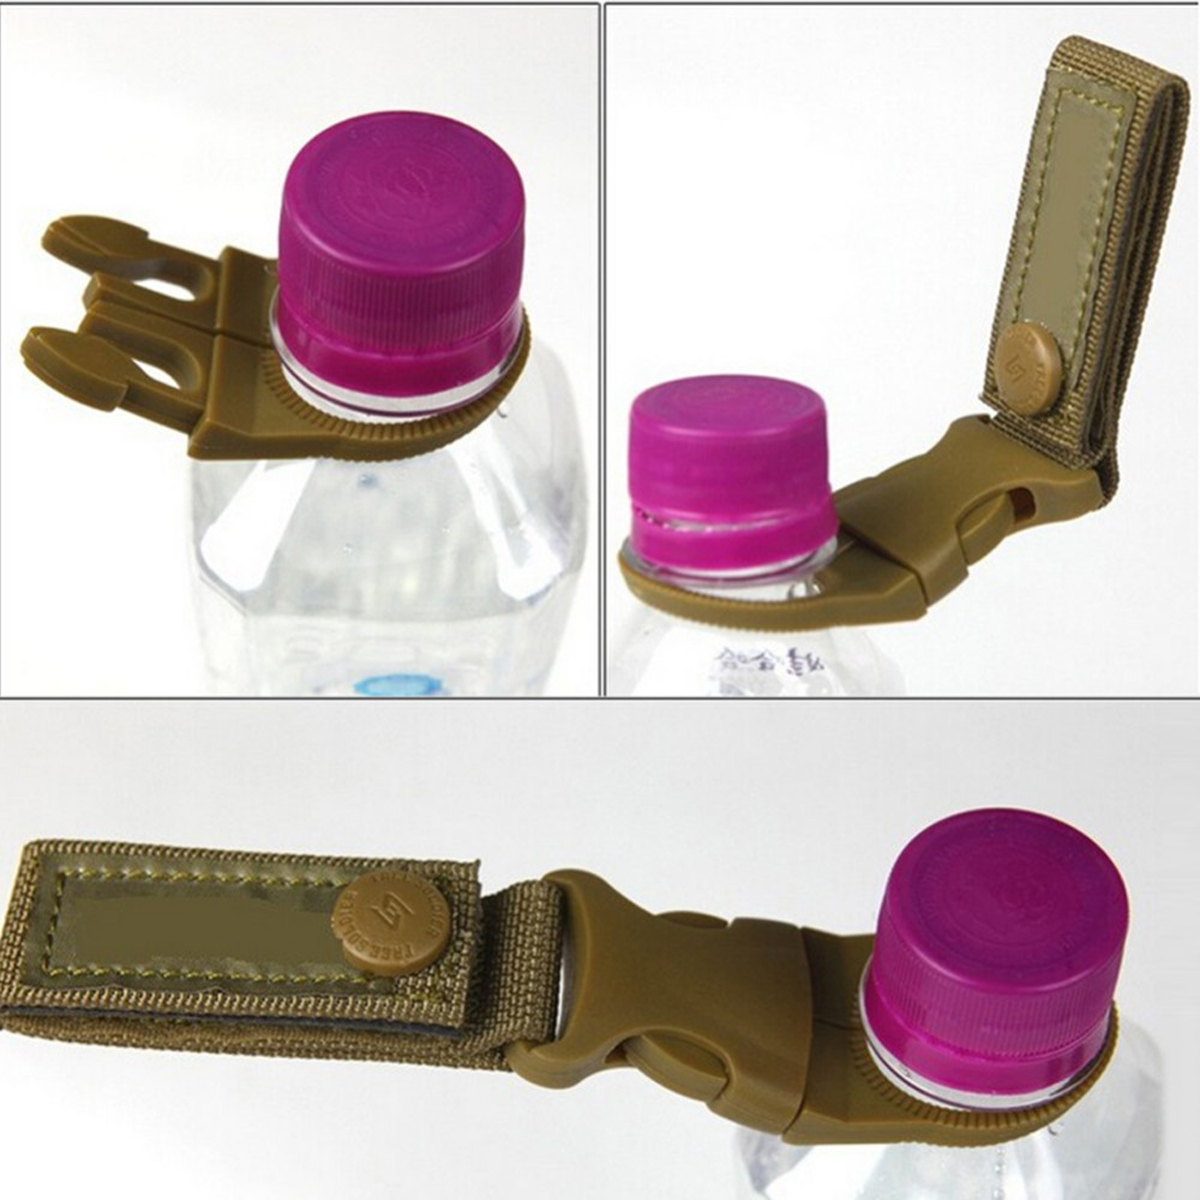 AWMN-R1-Gear-Clip-Nylon-Camouflage-Outdoor-Camping-Mountaineering-Buckle-Water-Bottle-Carrier-Holder-1340521-10